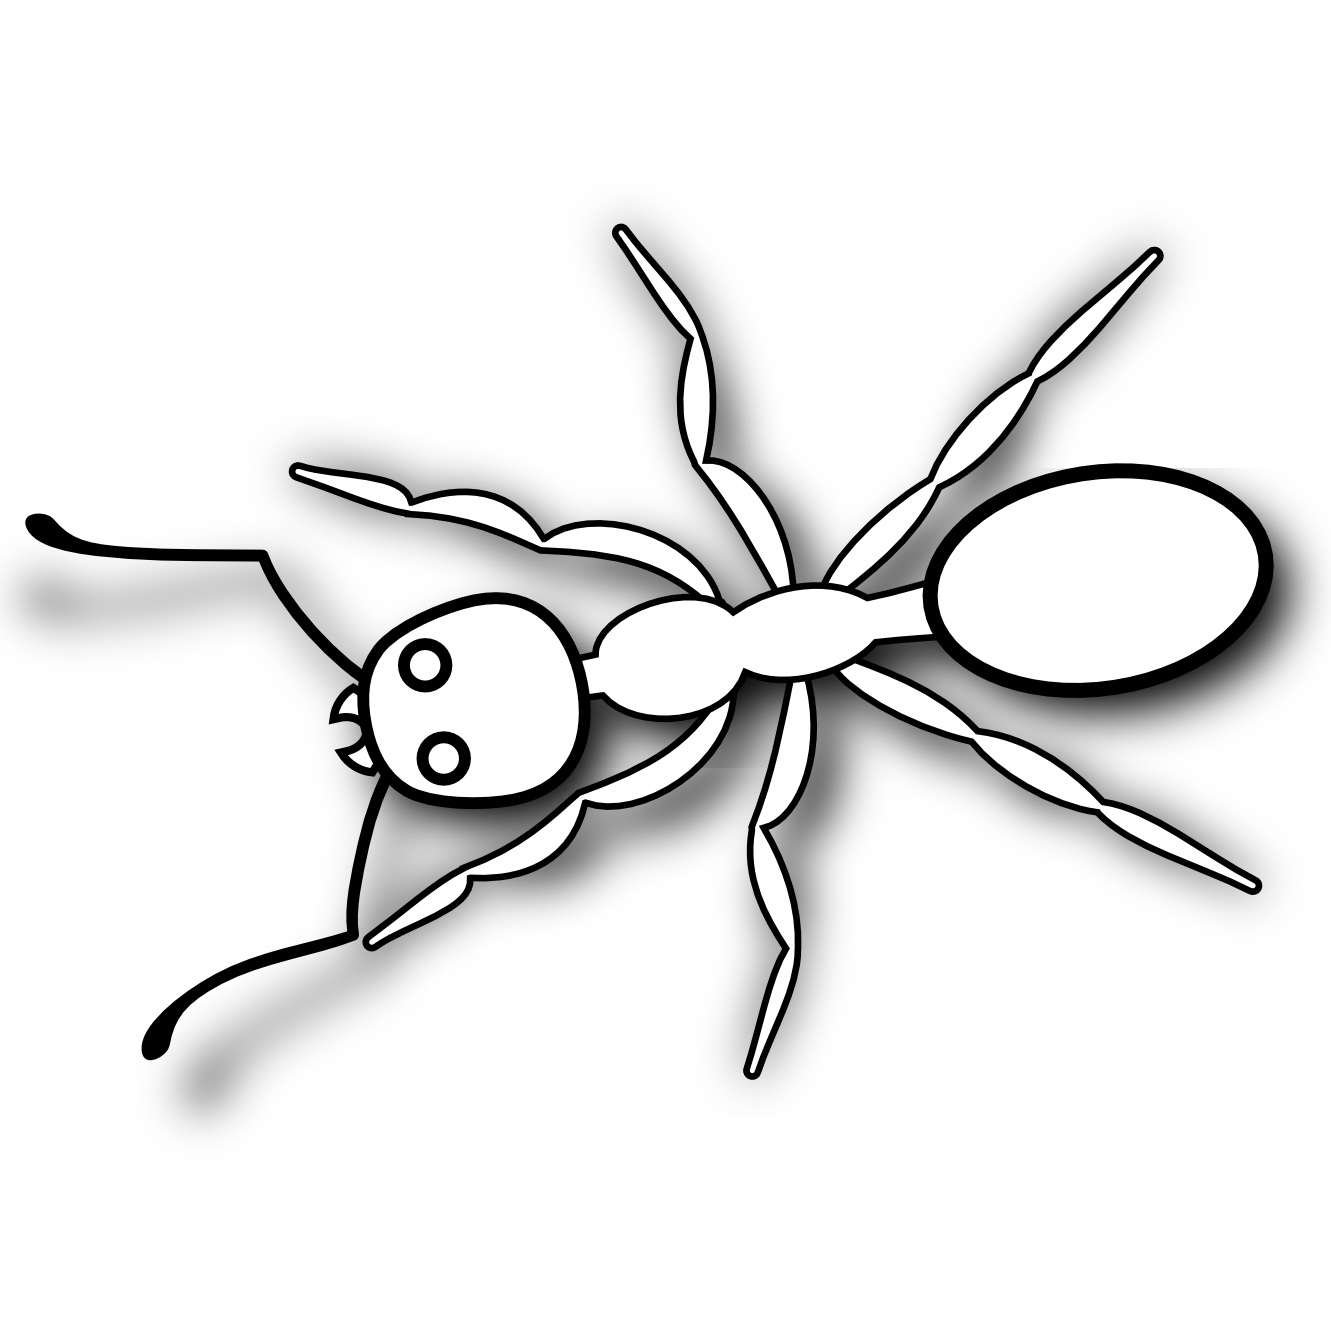 Coloring pages for your kids - page 111 : Ant Coloring Pages ...